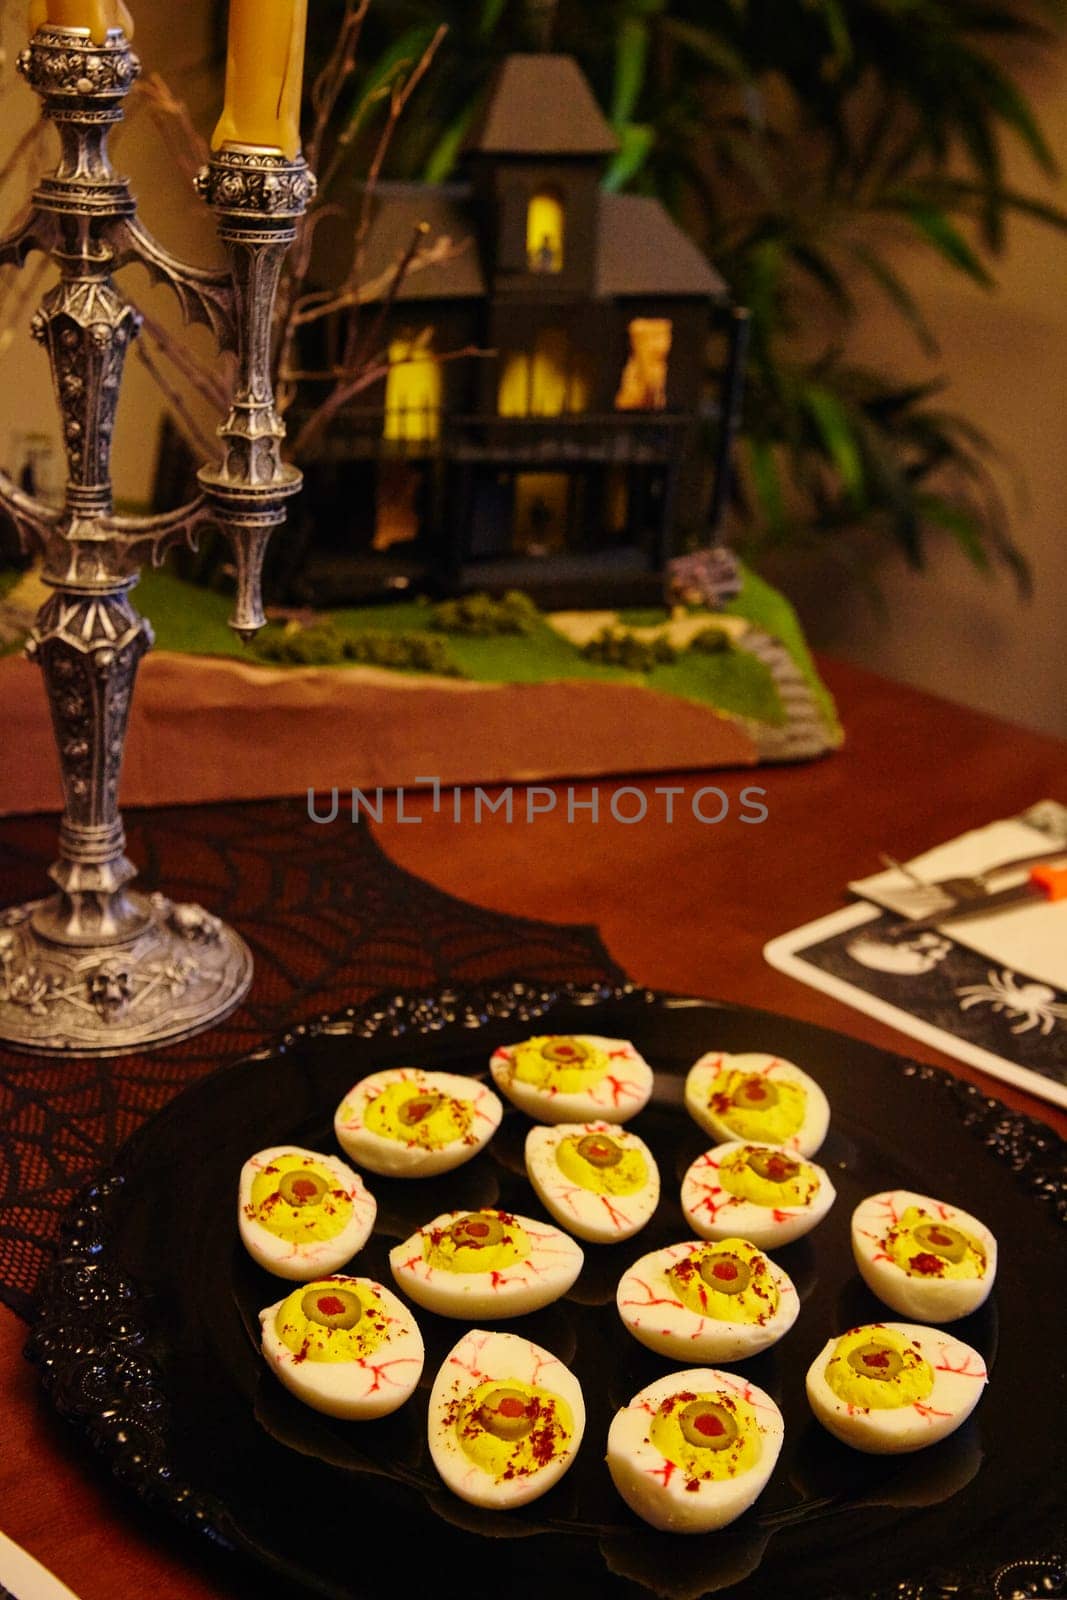 Eerie Halloween Dinner Setup with Eyeball Deviled Eggs and Haunted House by njproductions